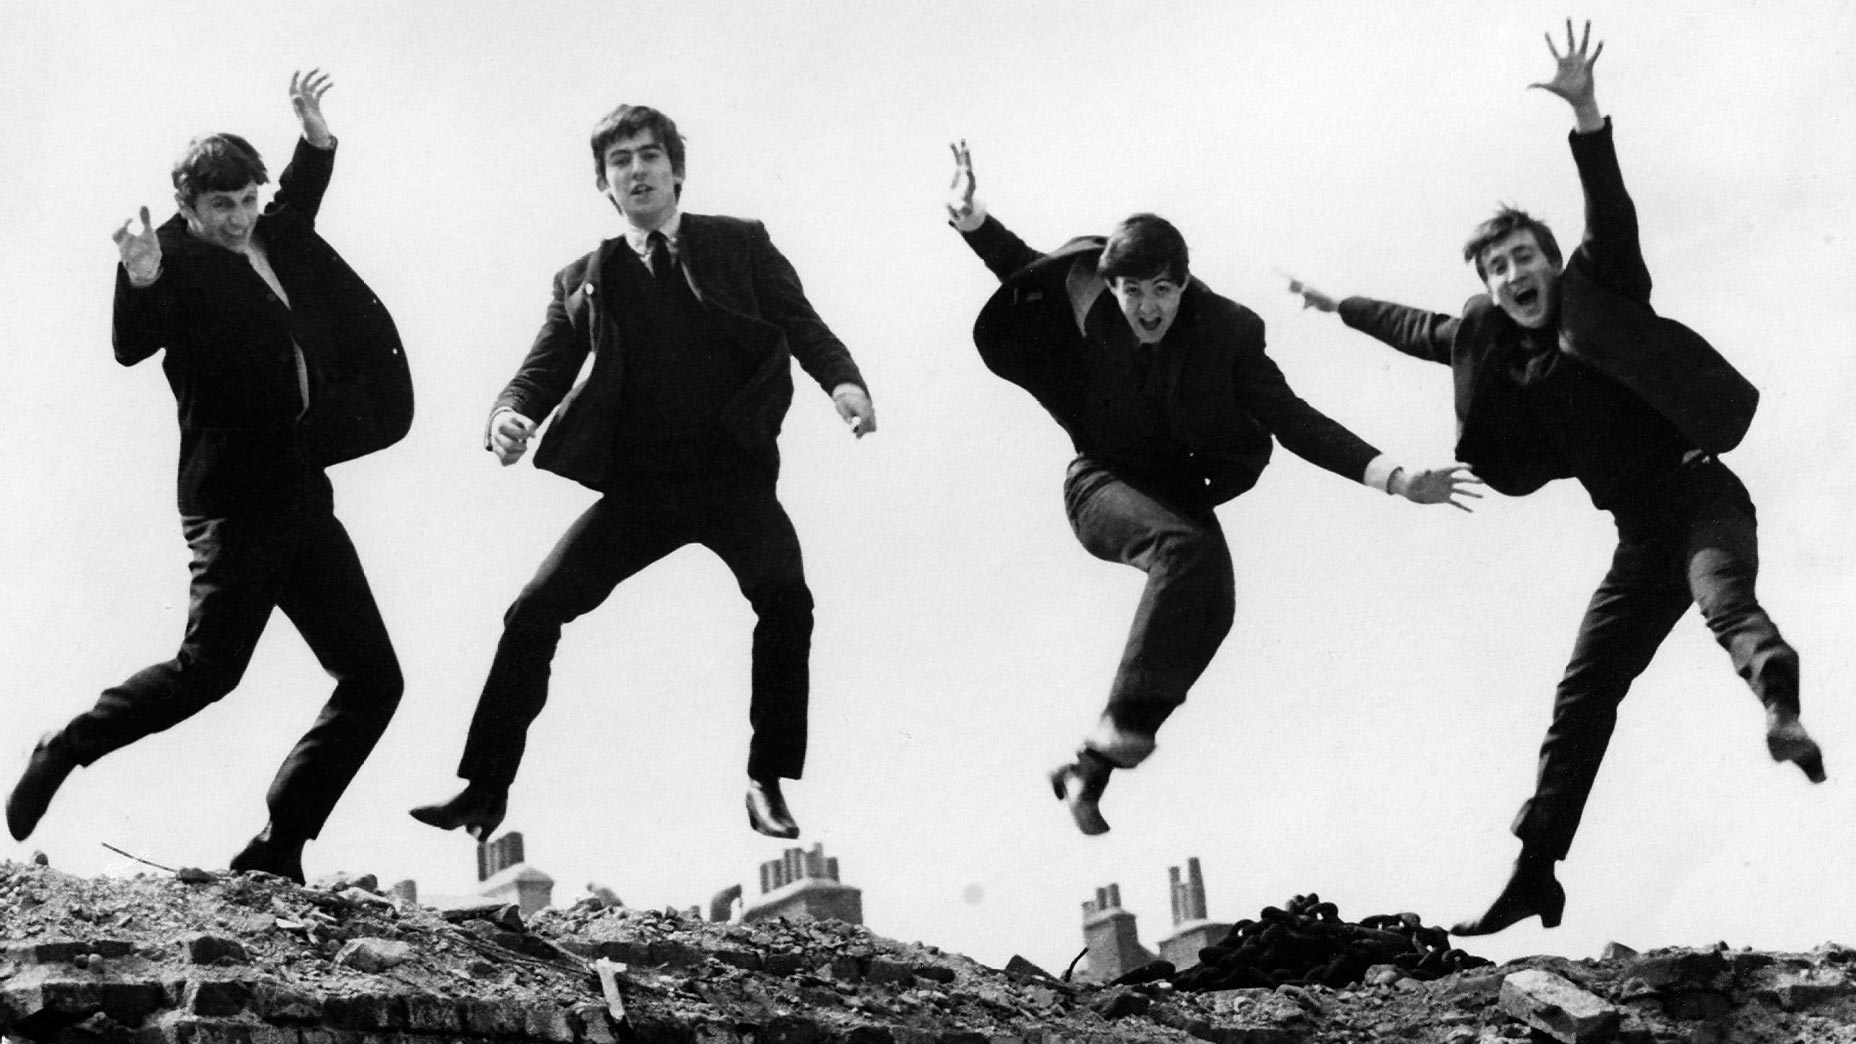 john lennon, paul mccartney, ringo star and george harrison jump off a brick wall in suits